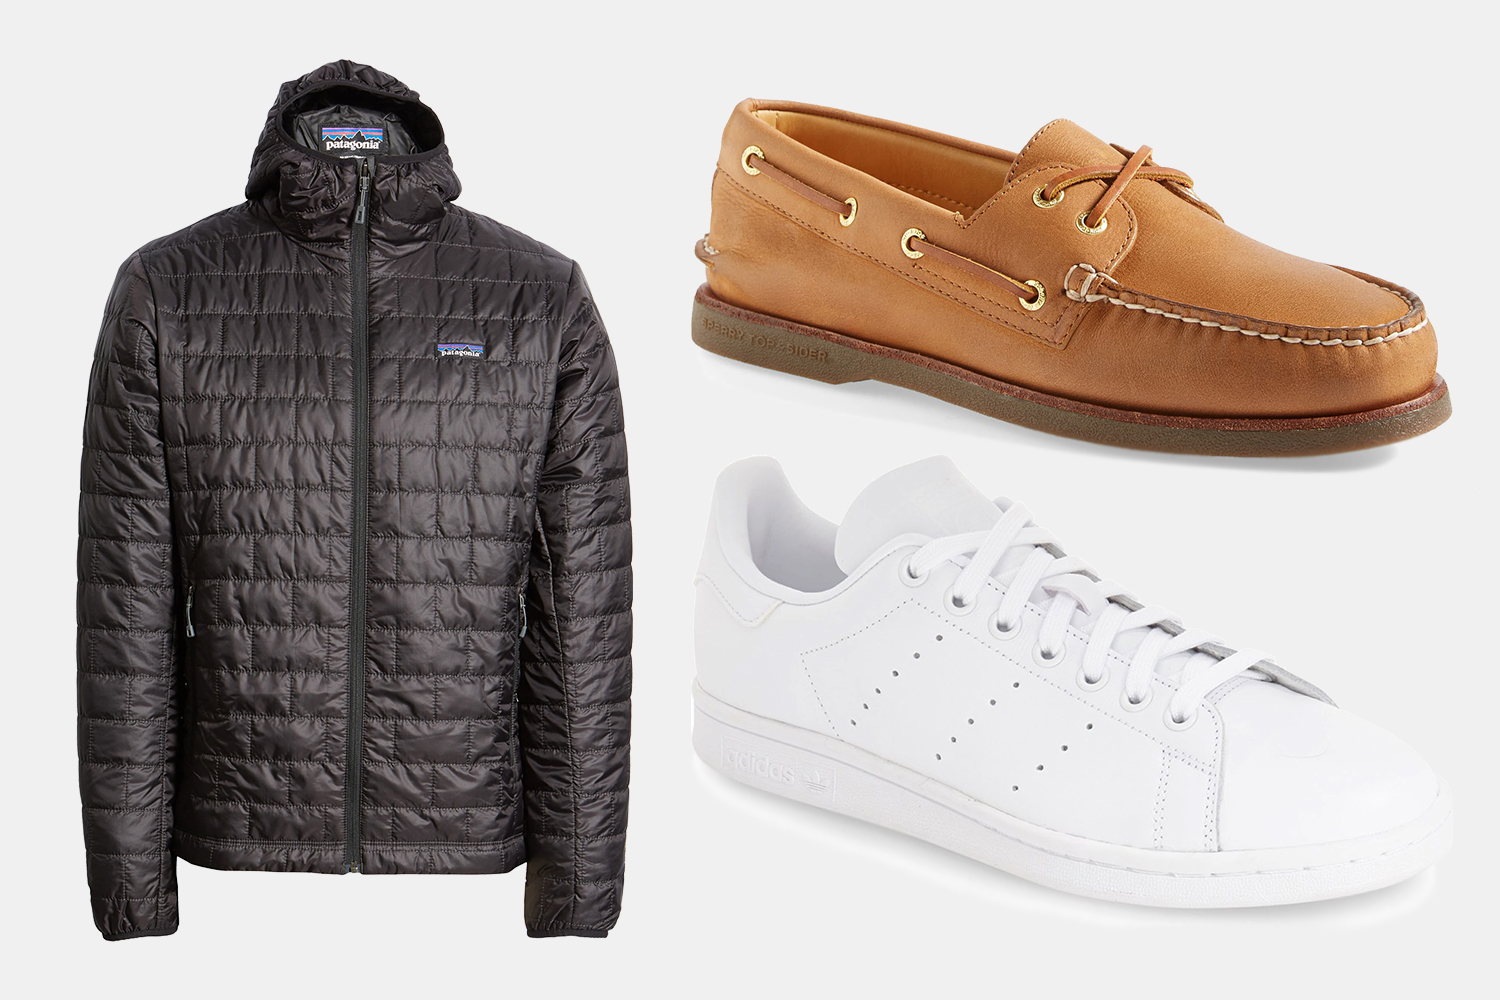 Patagonia Nano Puff Hooded Jacket, Sperry Gold cup Boat Shoes and Adidas Stan Smith sneakers